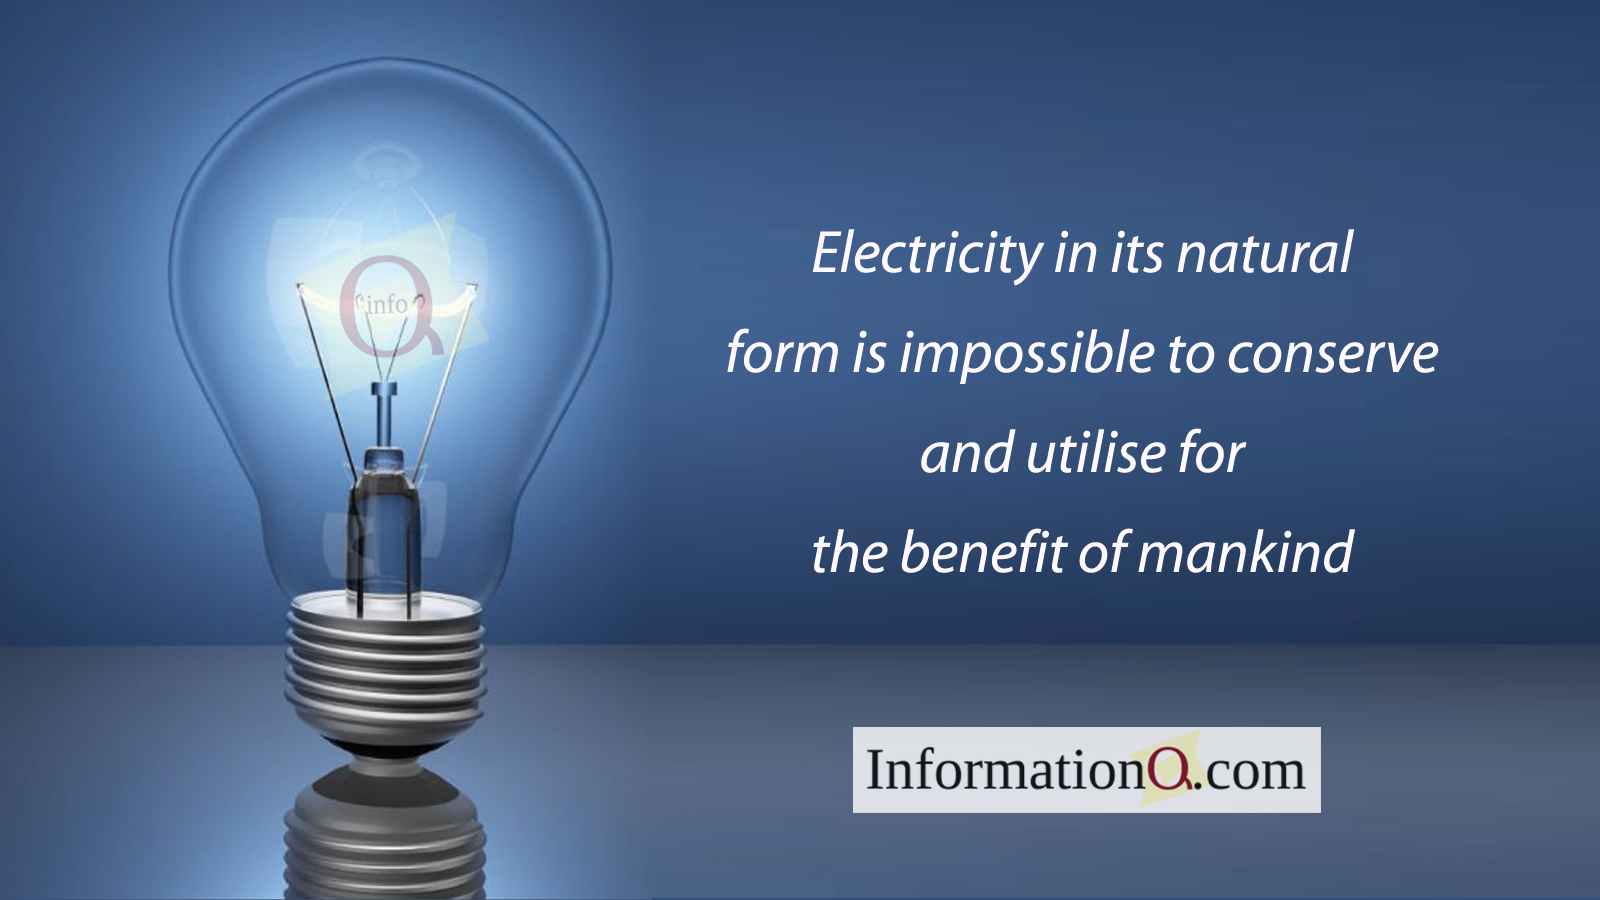 Electricity in its natural form is impossible to conserve and utilise for the benefit of mankind